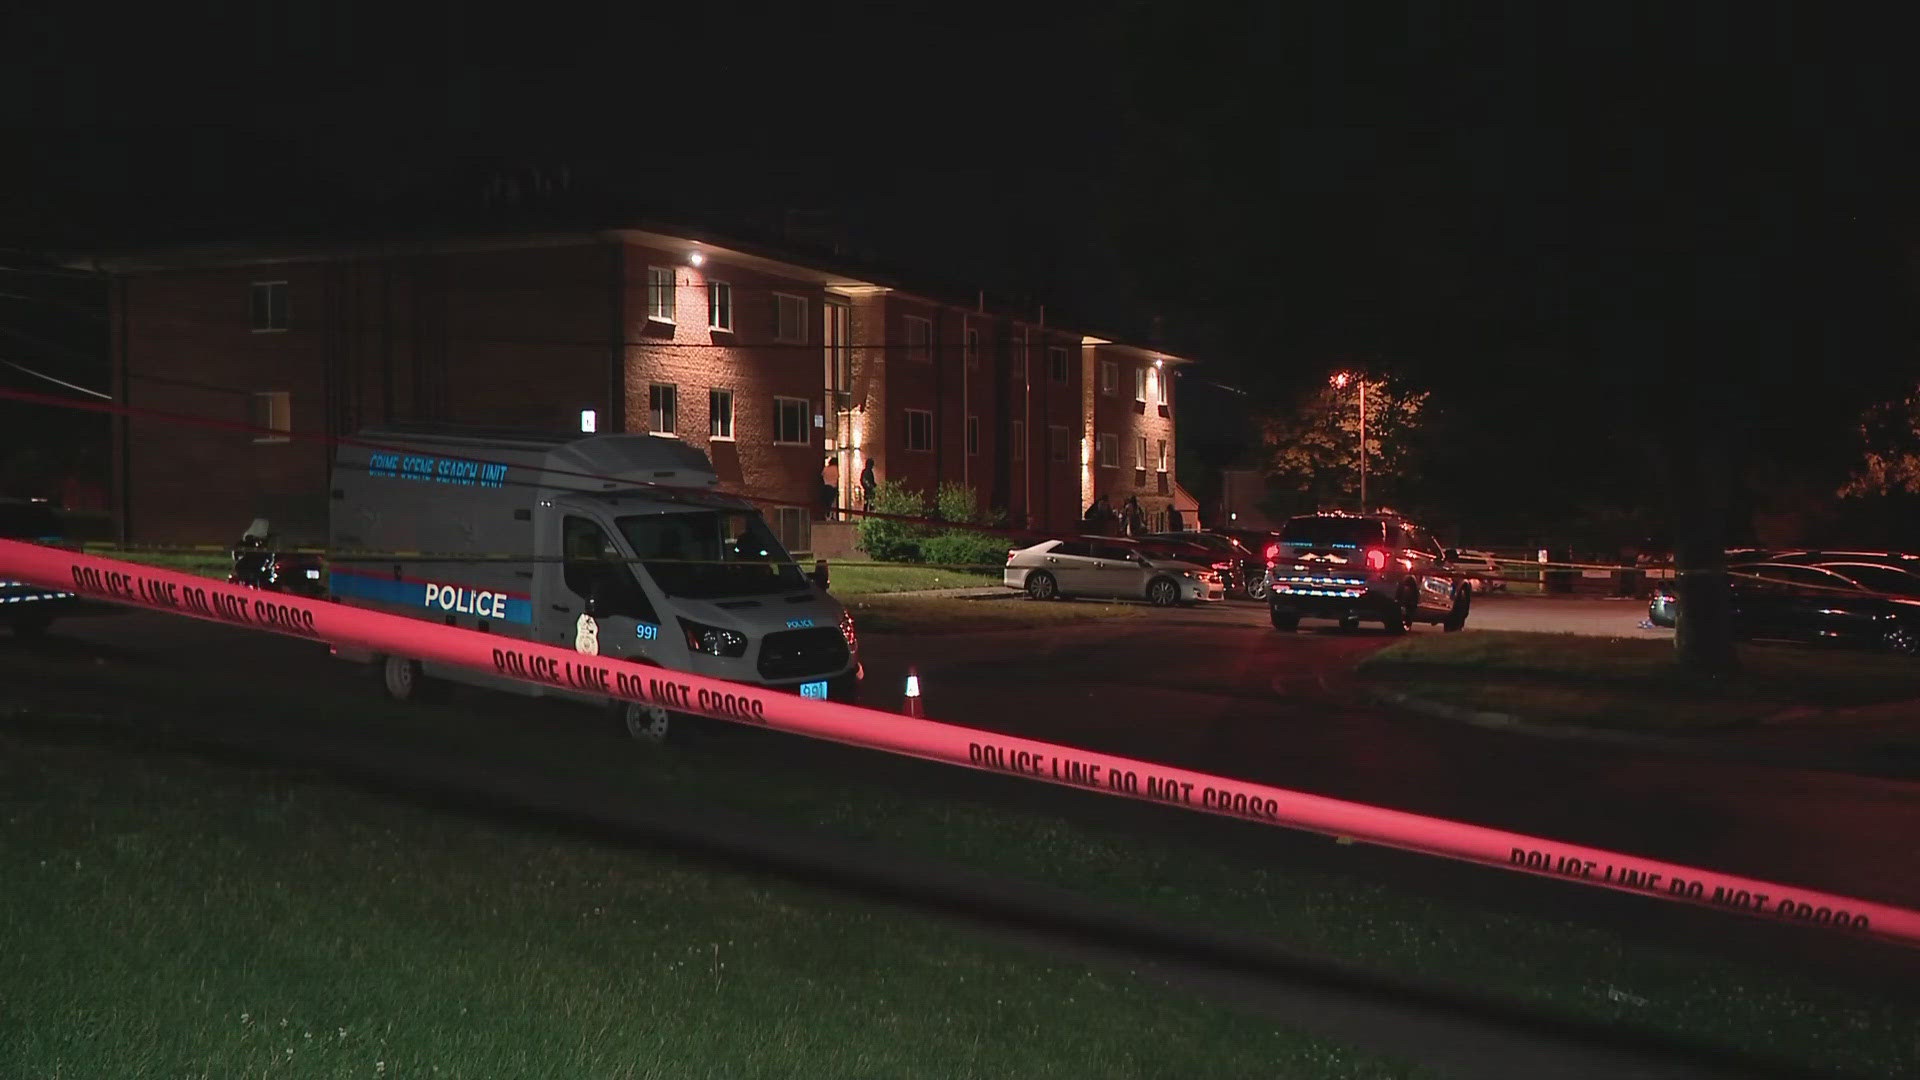 Officers were called on a report of multiple shots being fired in the 700 block of Canonby Place, located in the South Franklinton neighborhood, shortly after 7 p.m.